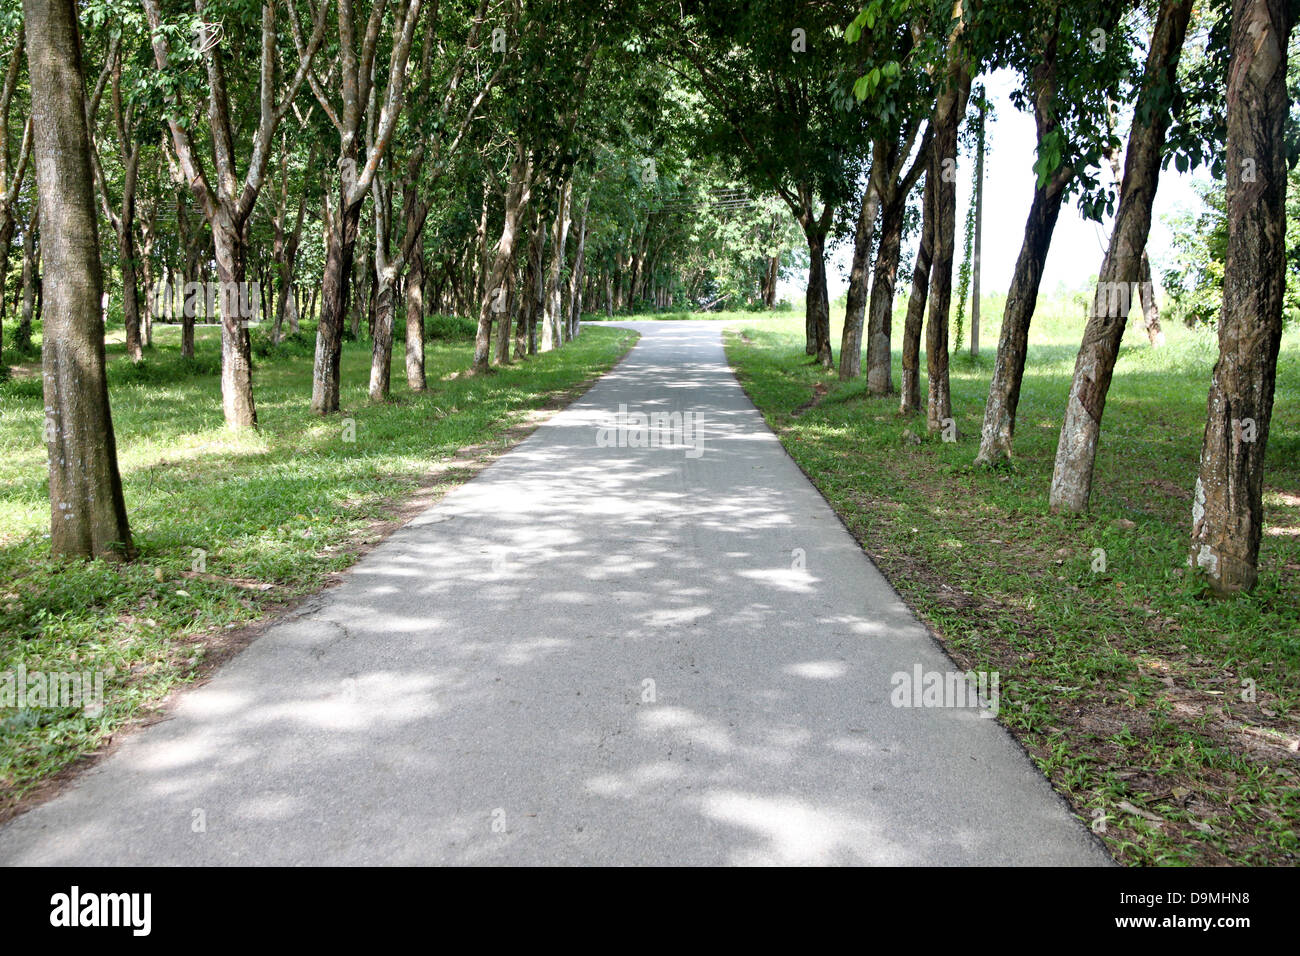 The road through the Rubber plantations and the Rubber tree on either side. Stock Photo